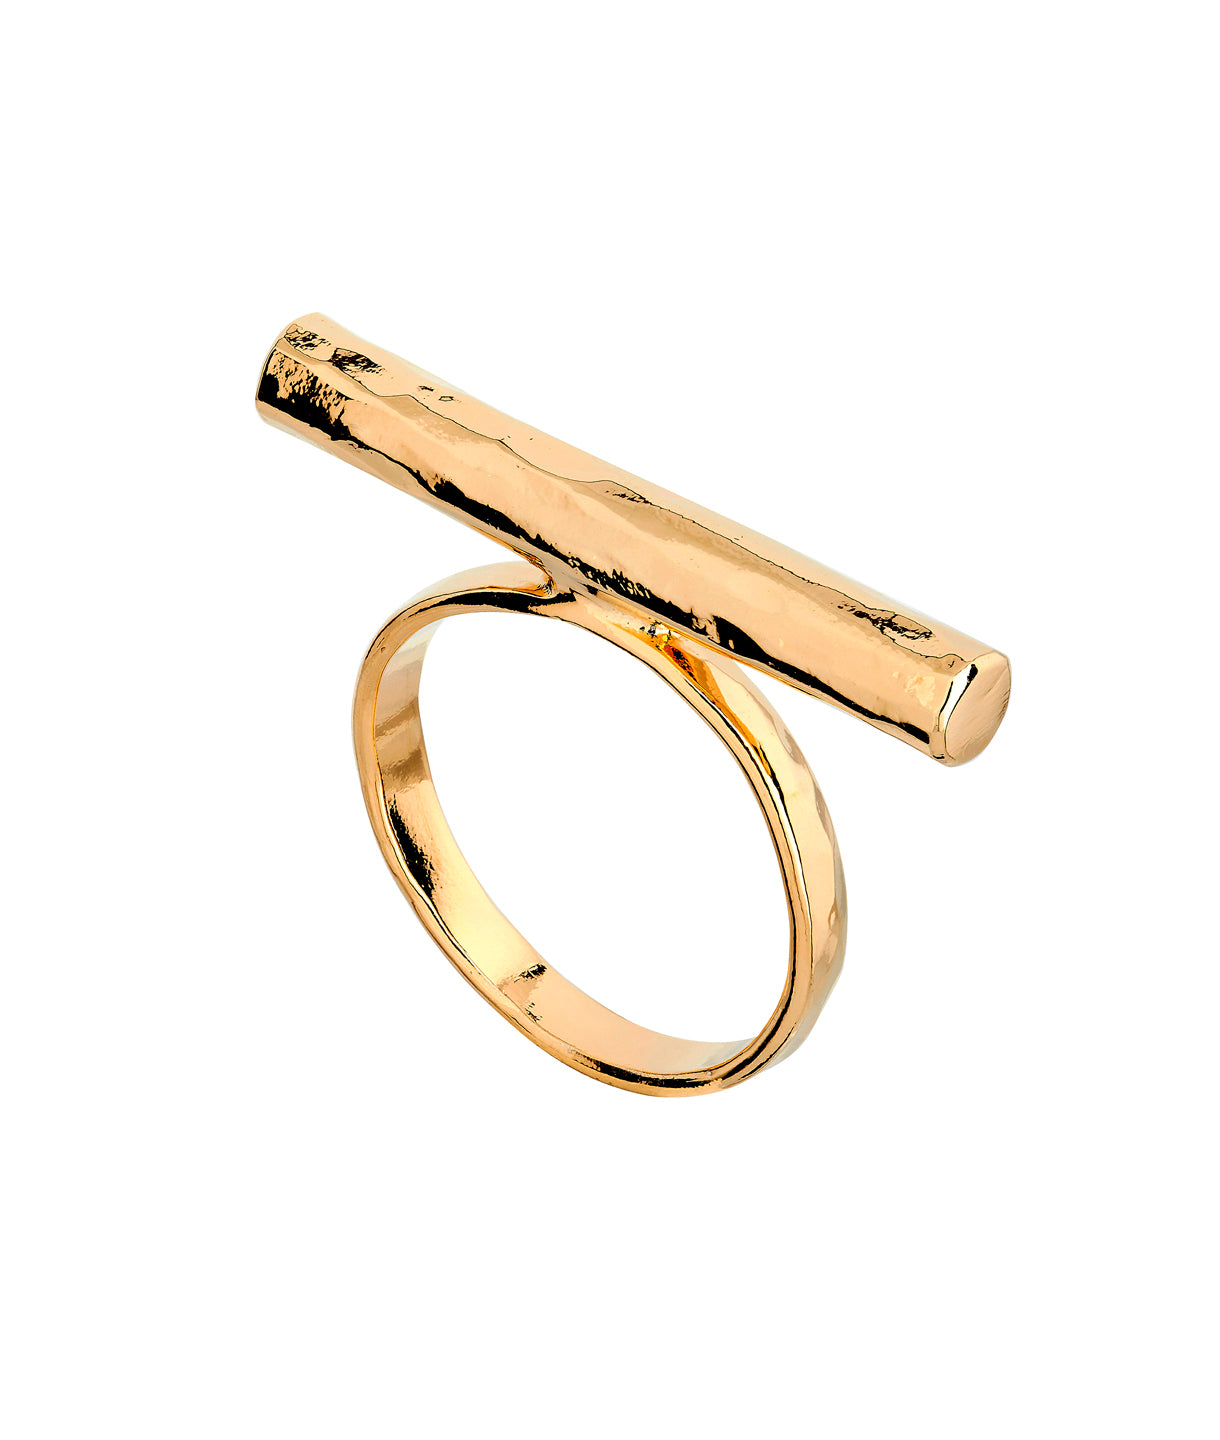 Hammered Bar Ring - Mirabelle Jewellery